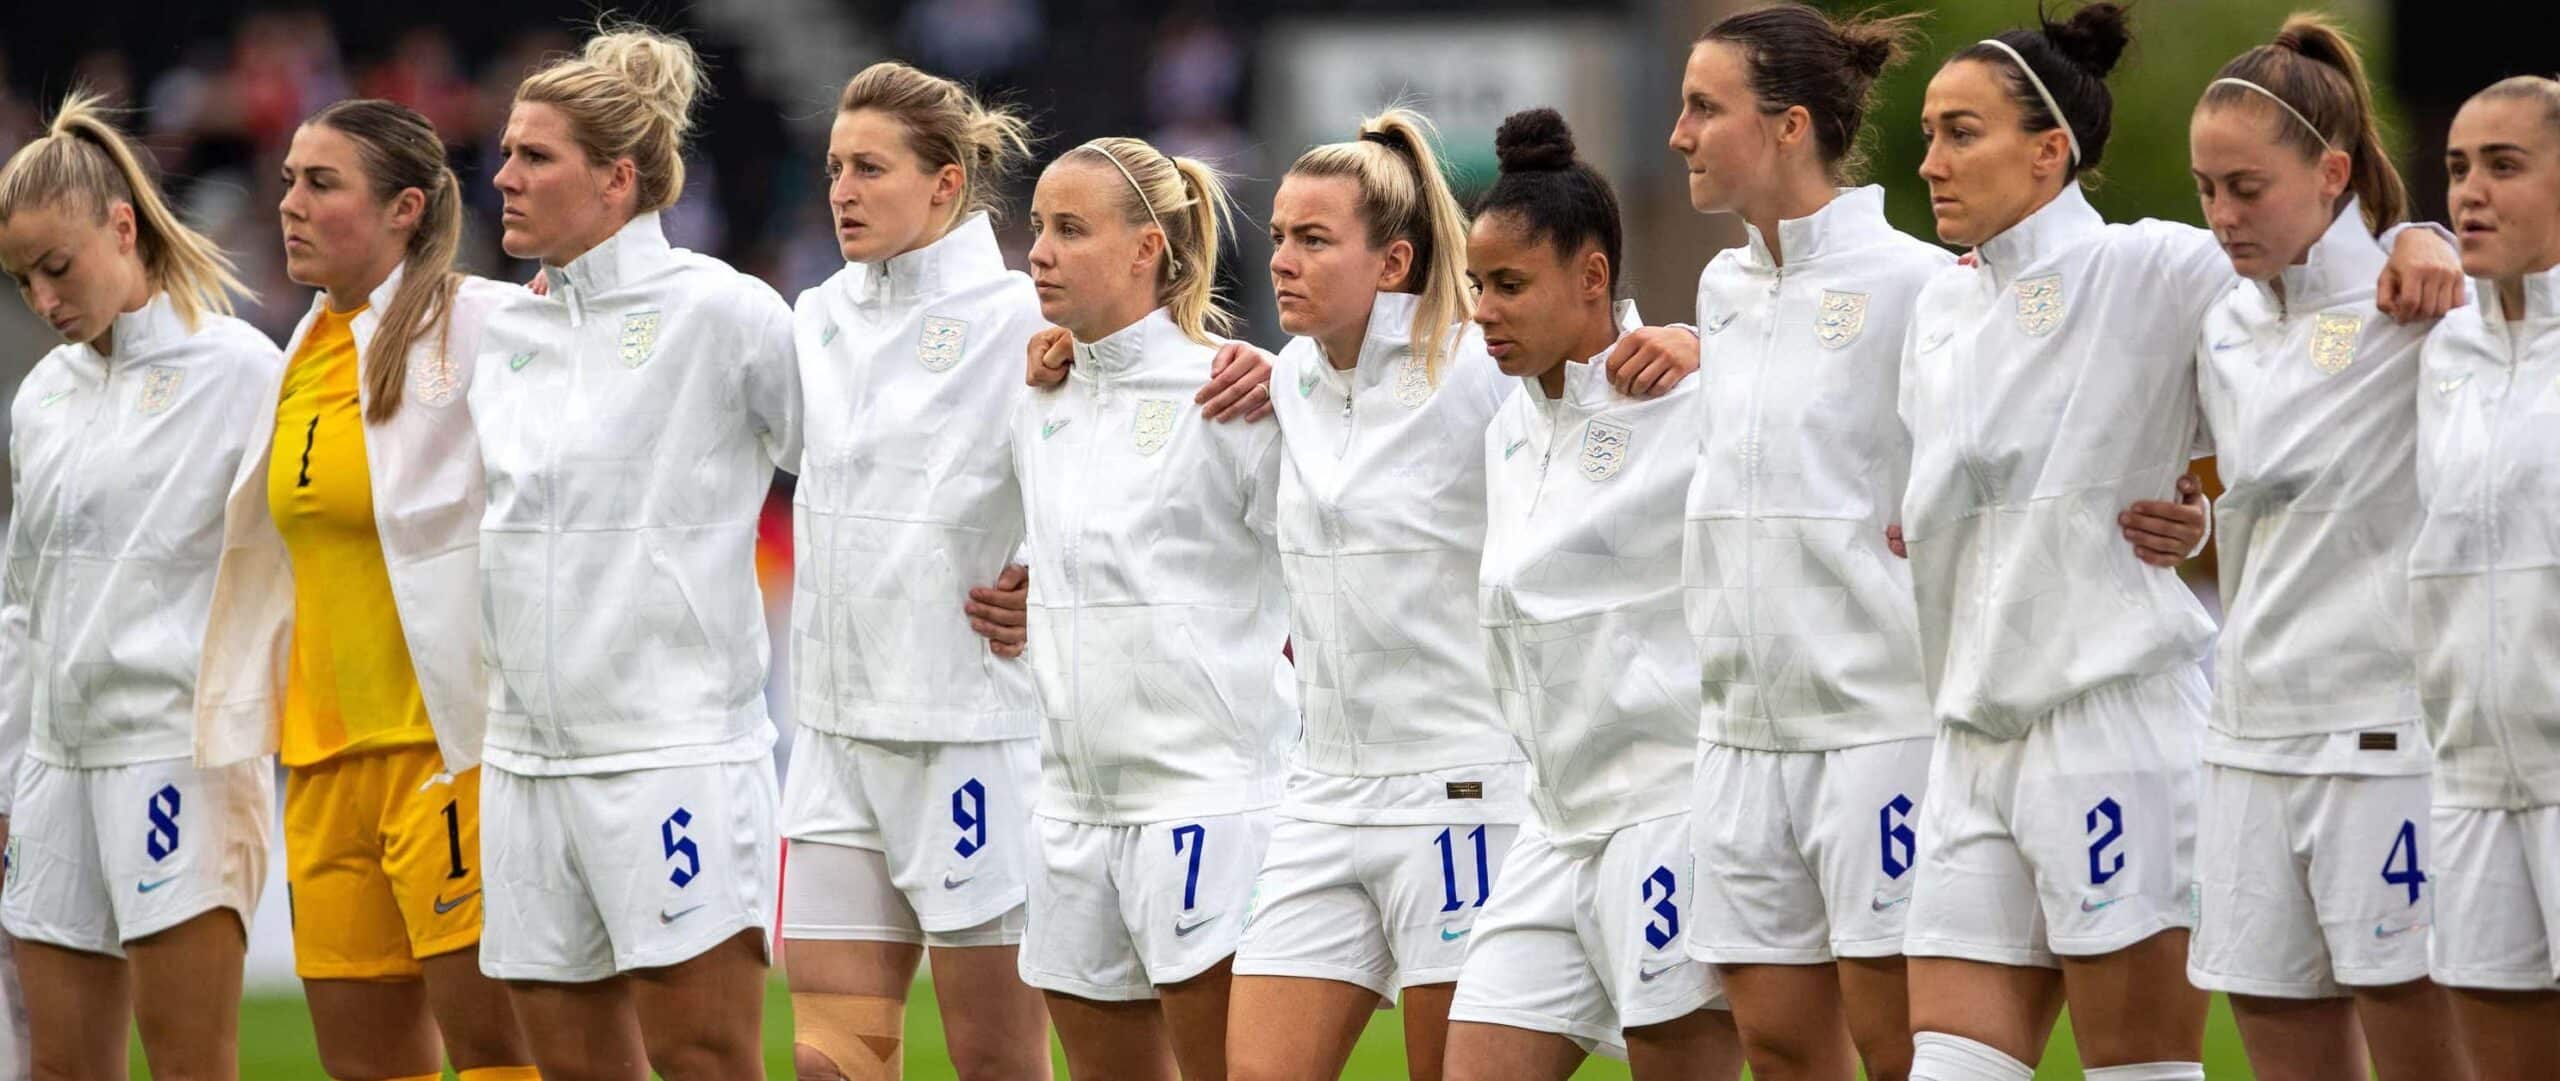 England women football team lineup before kickoff scaled